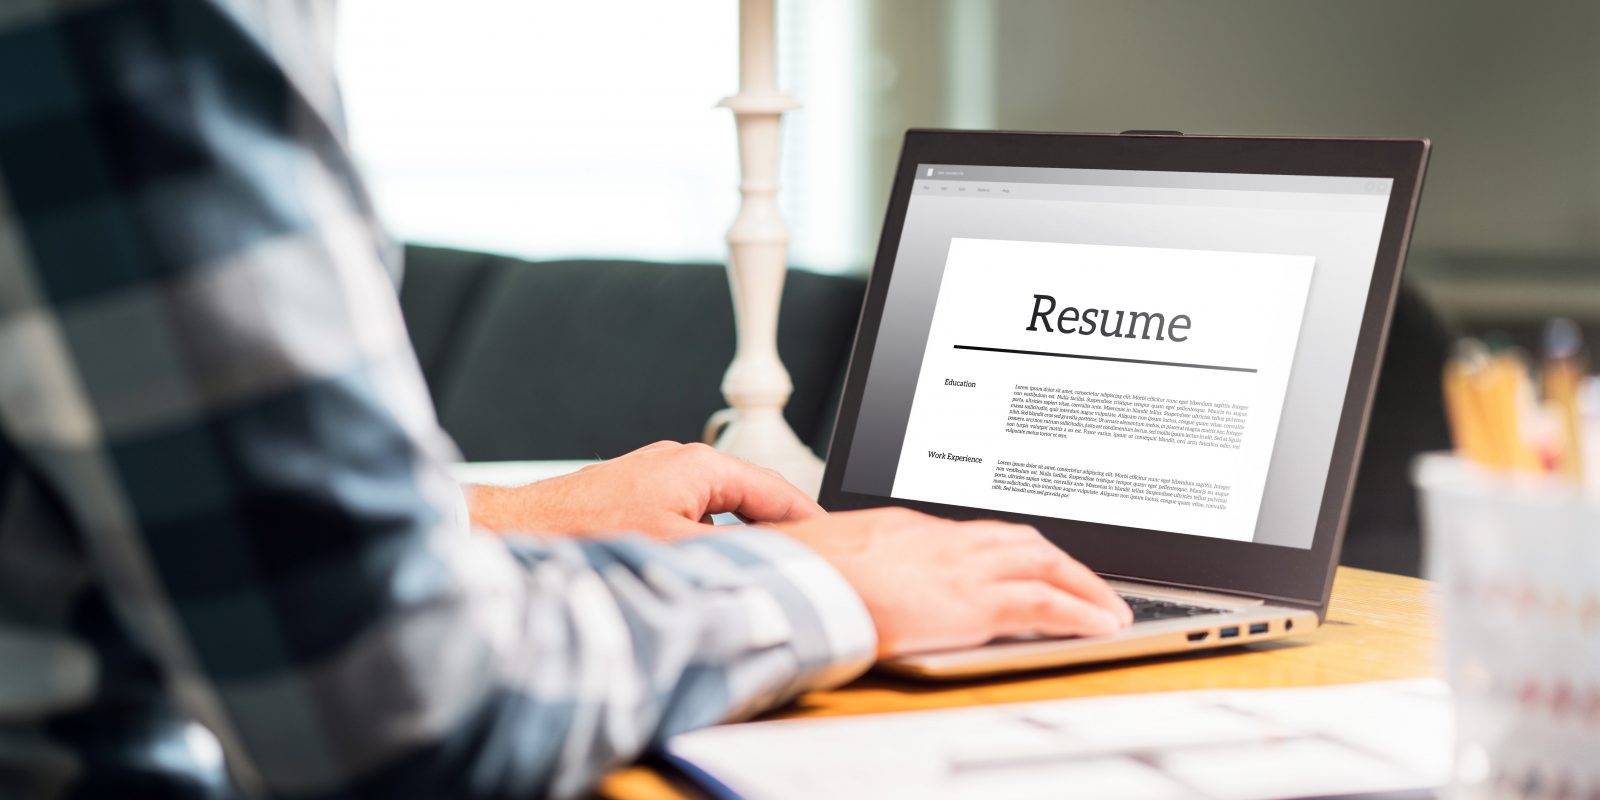 Tips to Write a Resume that Gets You Hired with Examples